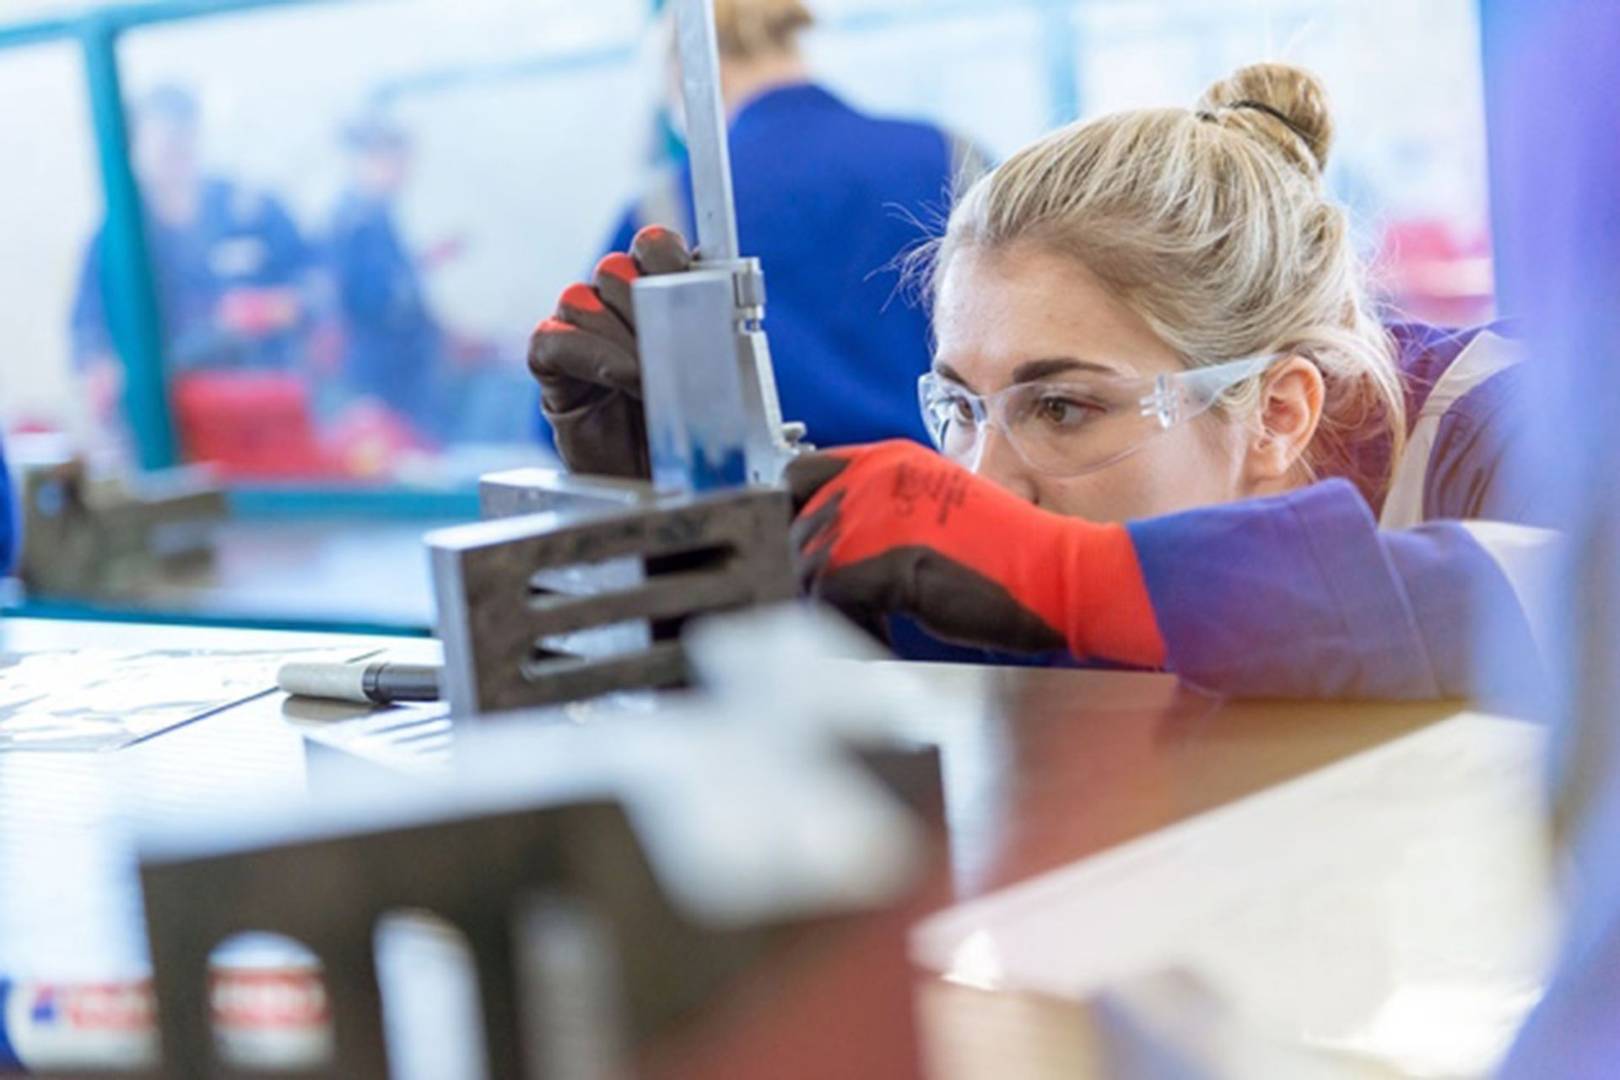 Edfs Pretty Curious Stem Campaign Criticised For Sexist Name